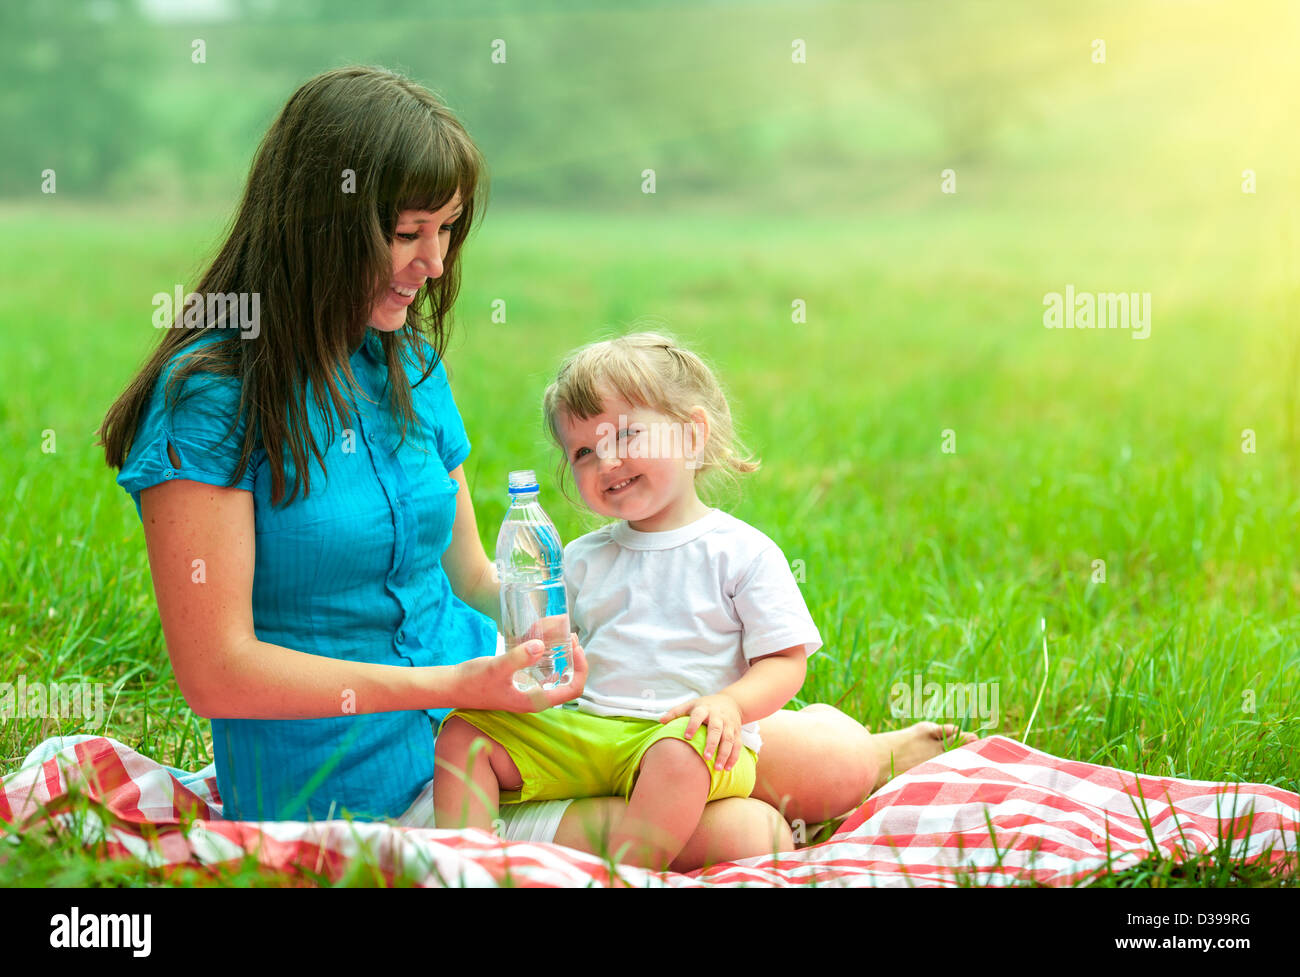 mother and daughter have picnic outdoor drinking water from plastic bottle Stock Photo